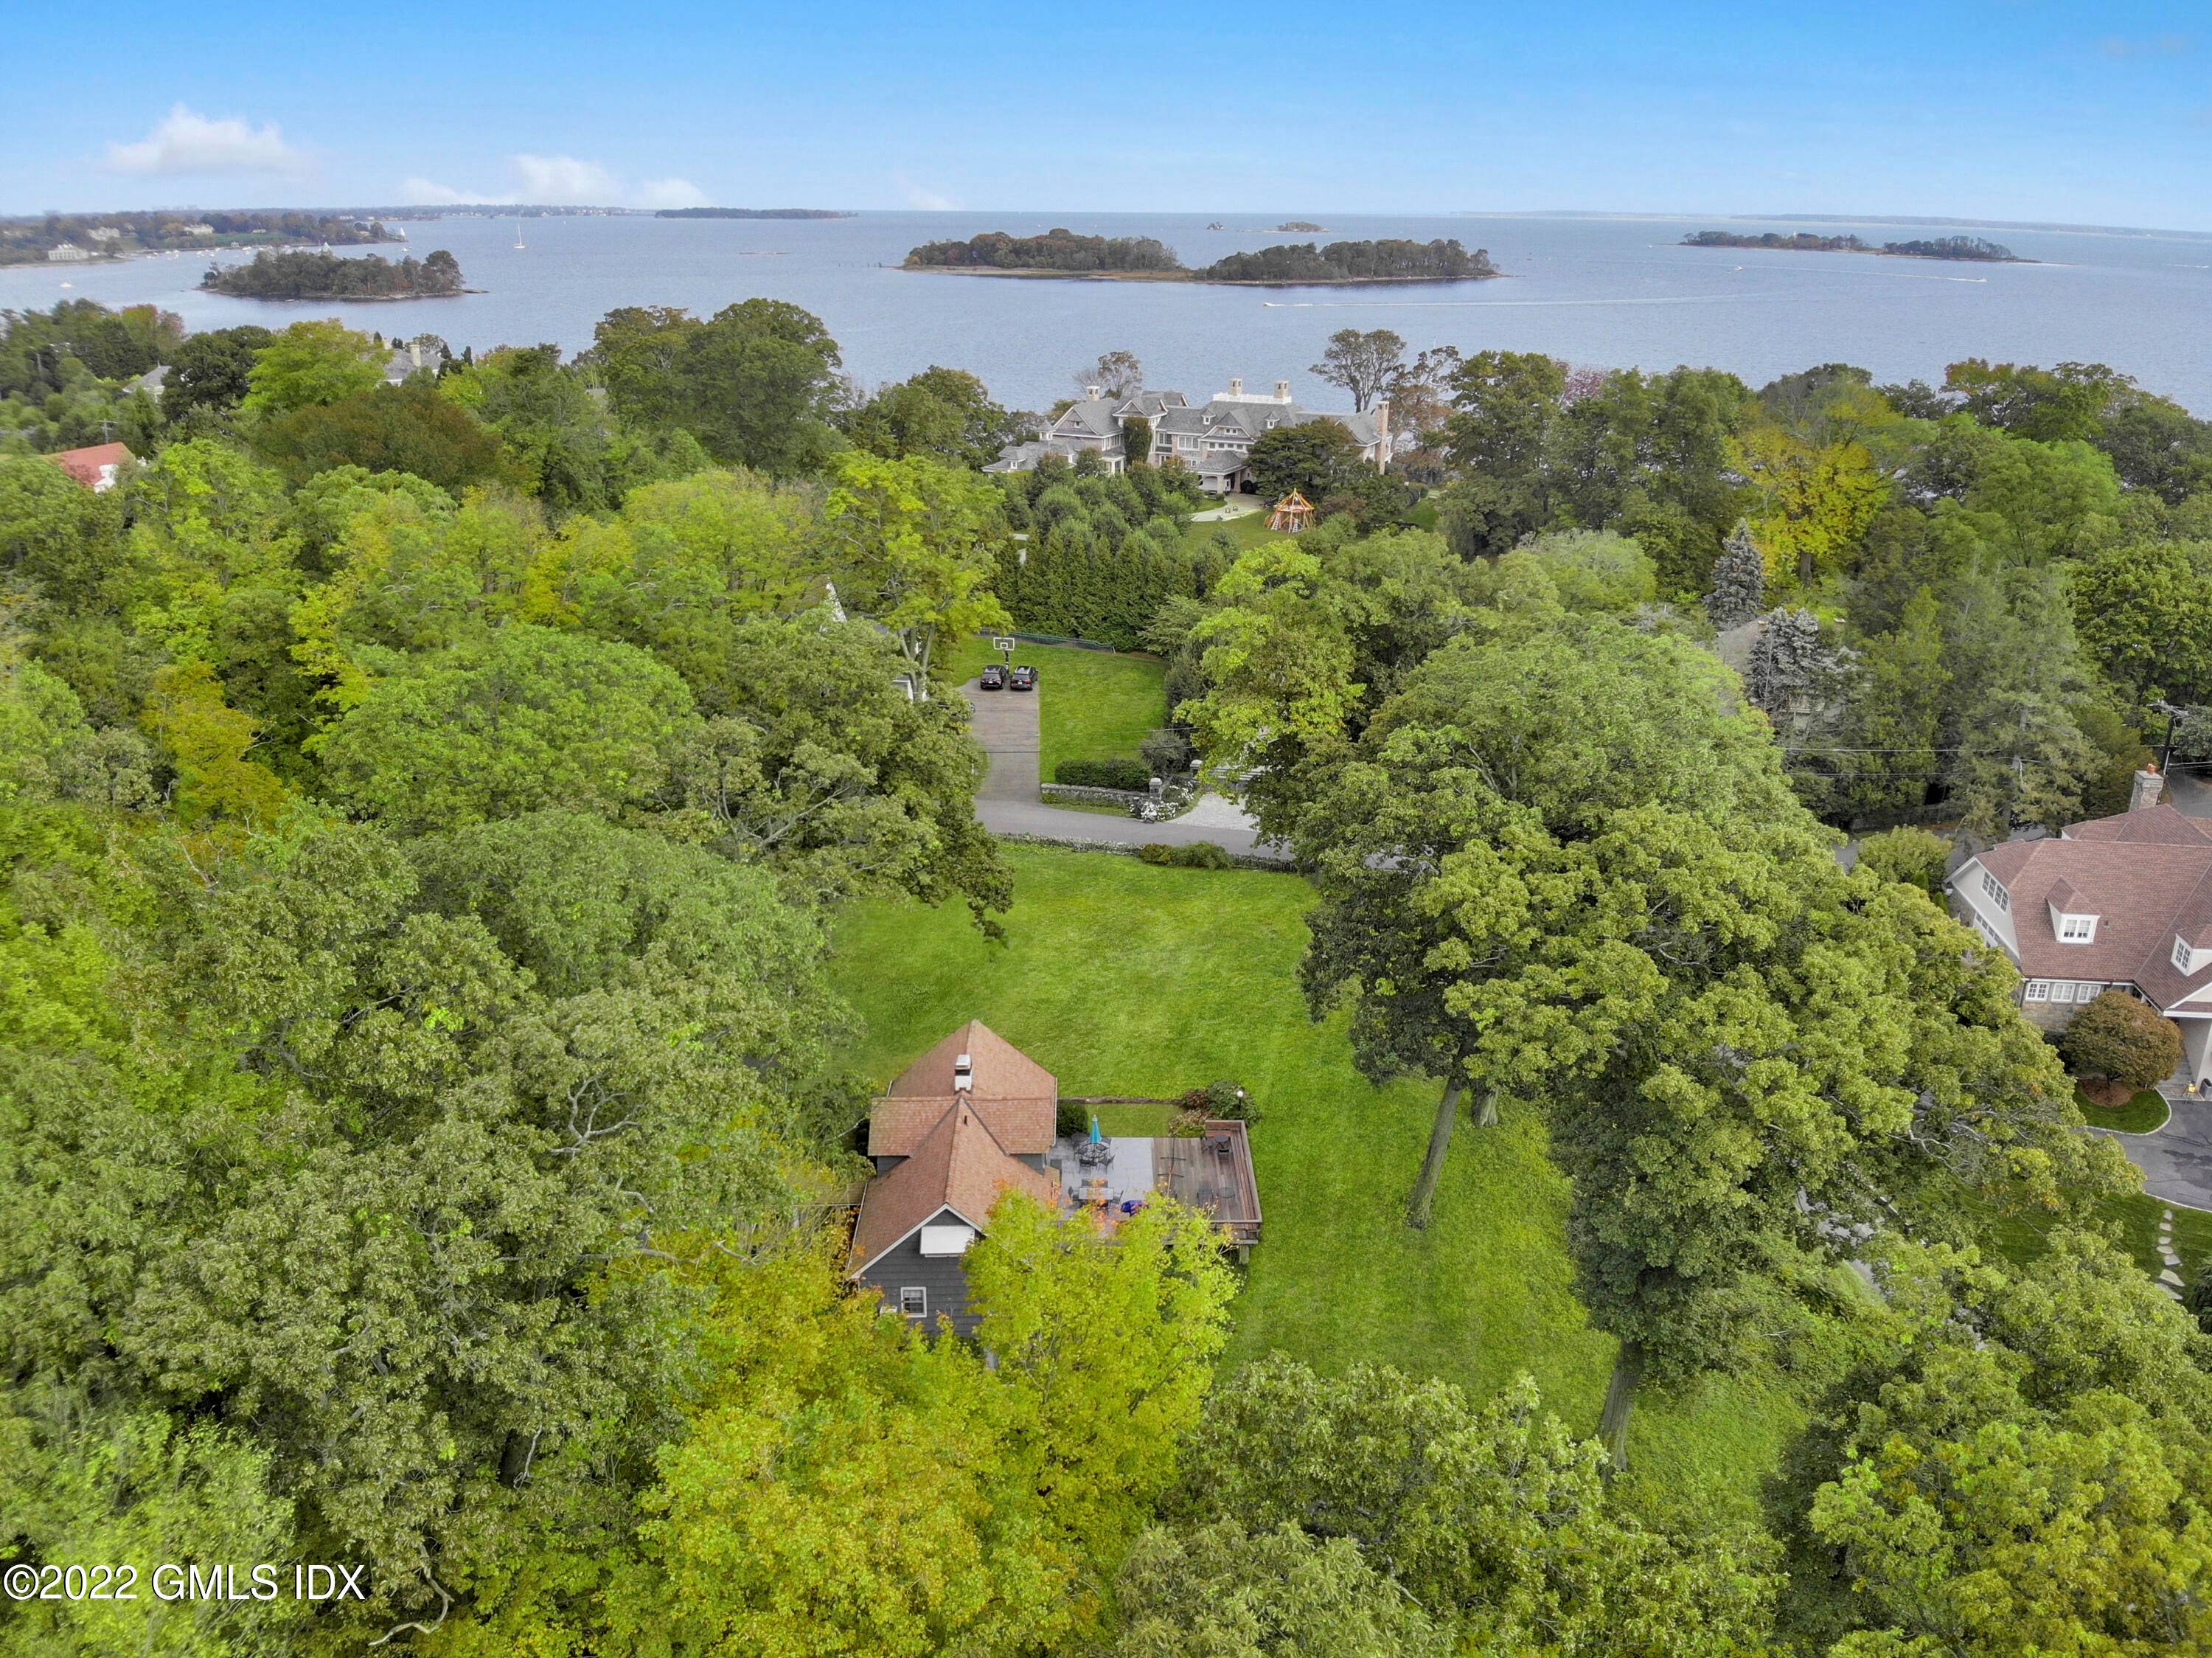 Waterfront property located in the private Hawthorne Beach Association of Byram Shore Road.